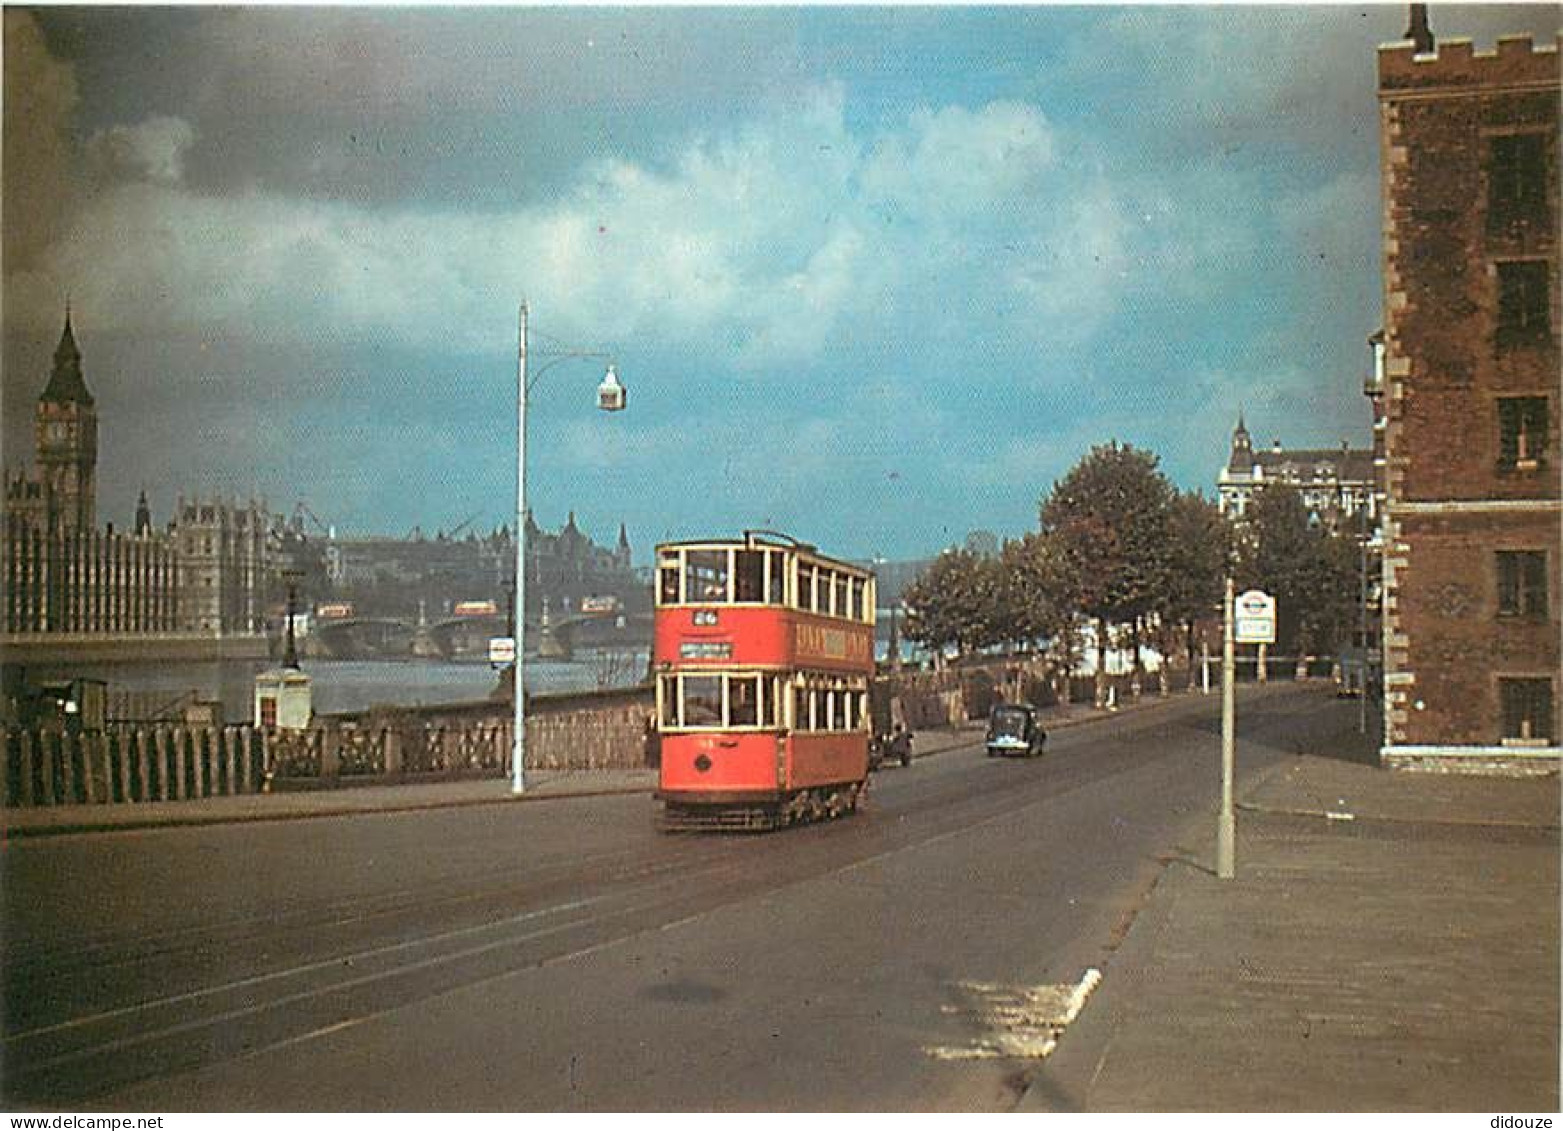 Trains - Tramways - Royaume-Uni - United Kingdom - London - An American Visitor Took This Rare Colour Photo Of A London  - Tram